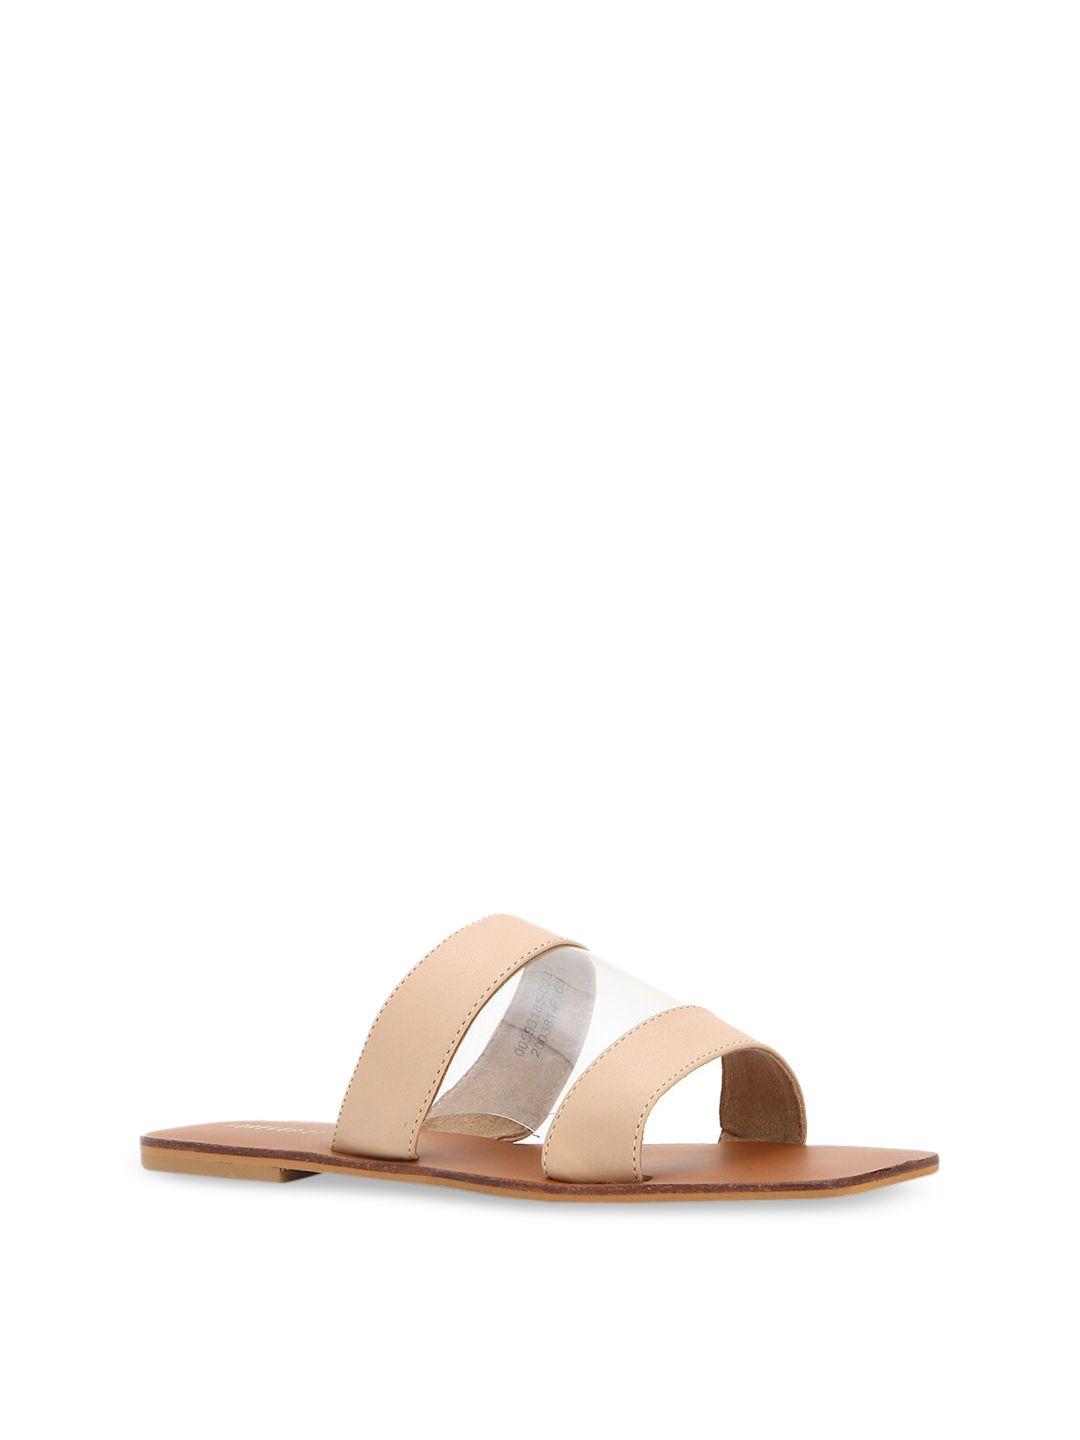 FOREVER 21 Women Nude-Coloured Open Toe Flats